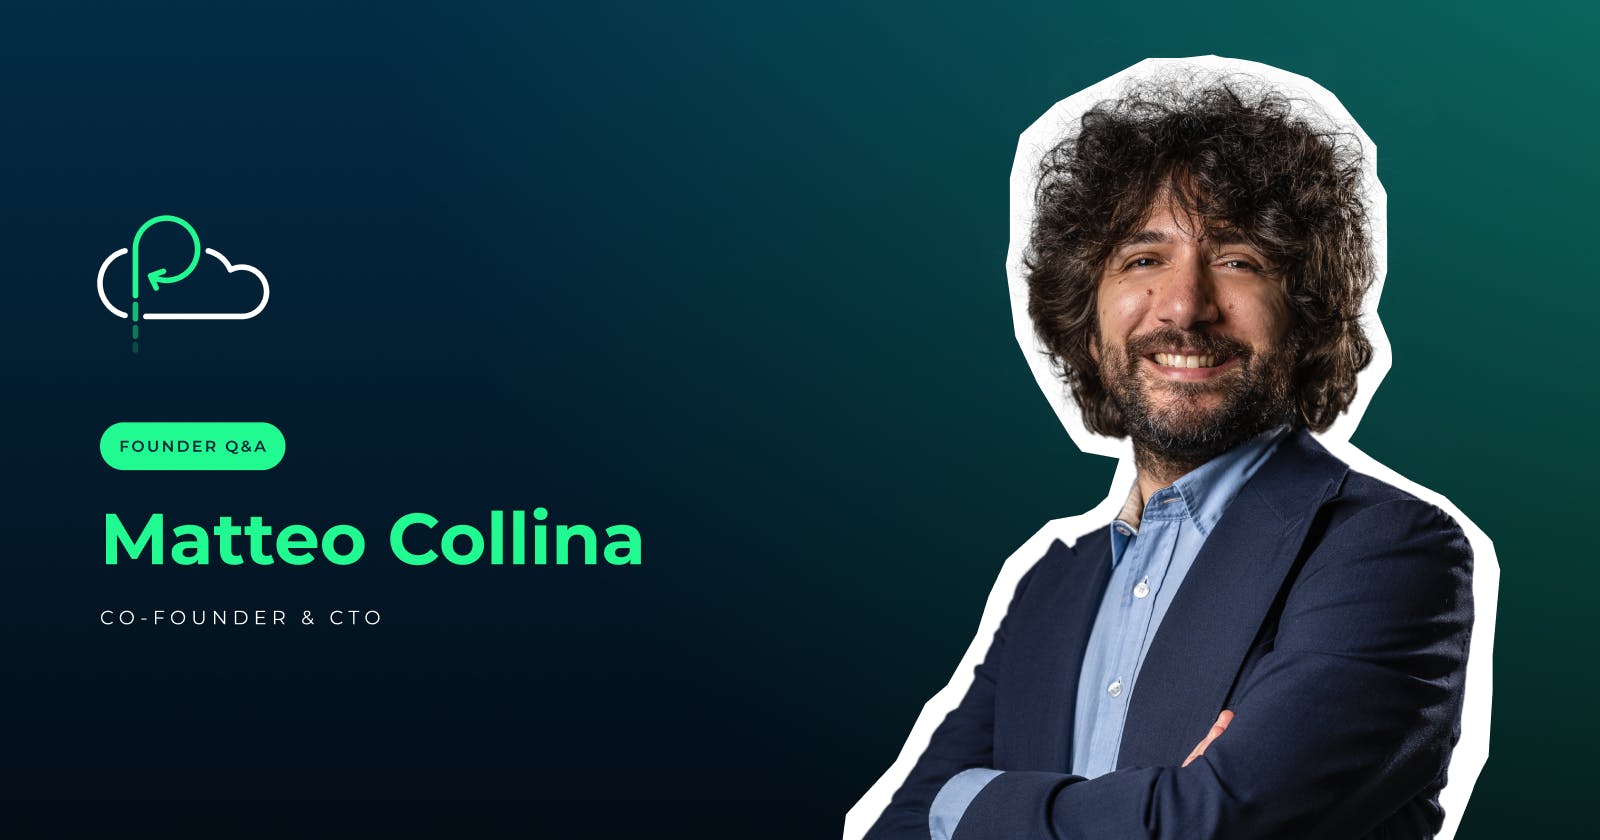 Meet the Platformatic Founders: Q&A with CTO Matteo Collina